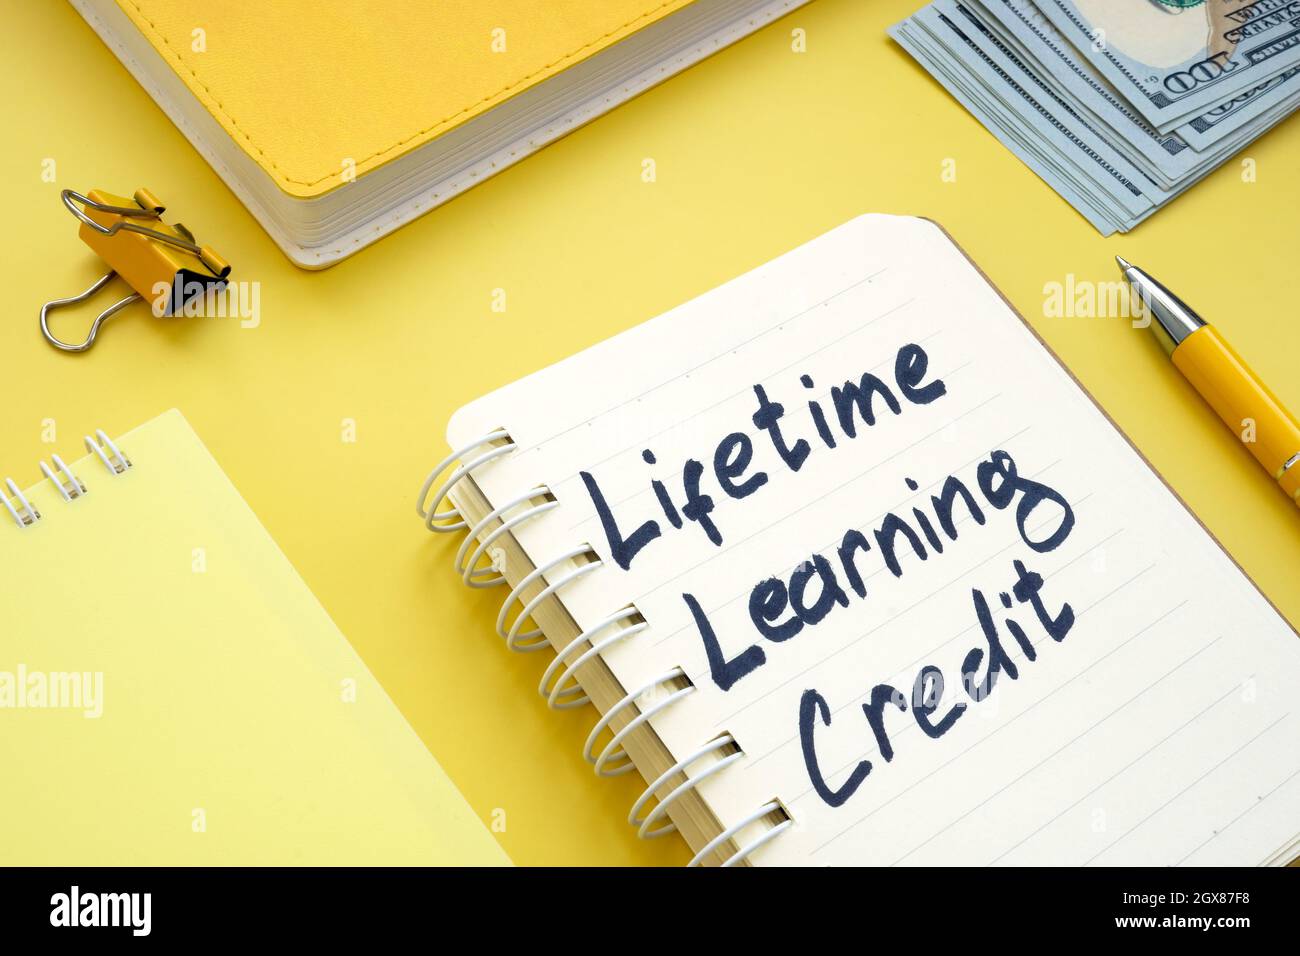 Lifetime learning credit memo on the page. Stock Photo